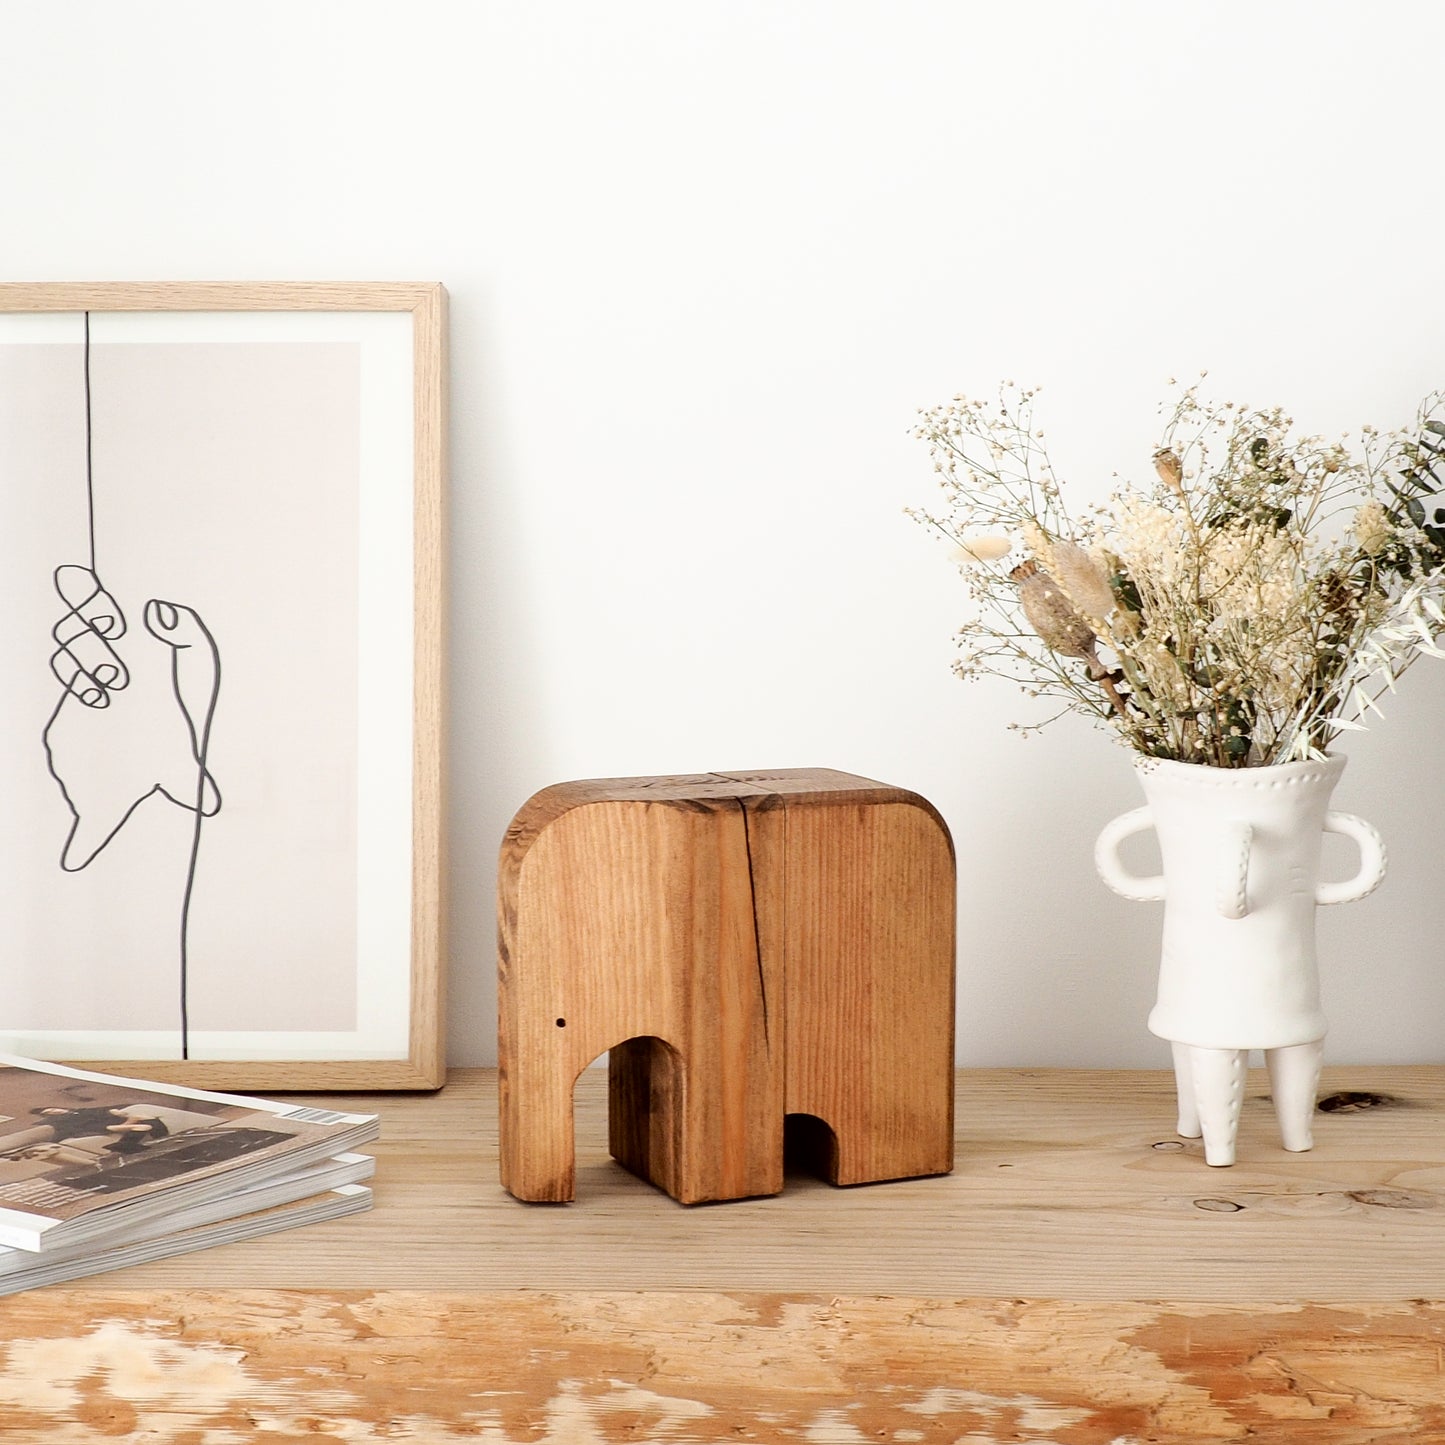 "The elephant in the room" | Bookend